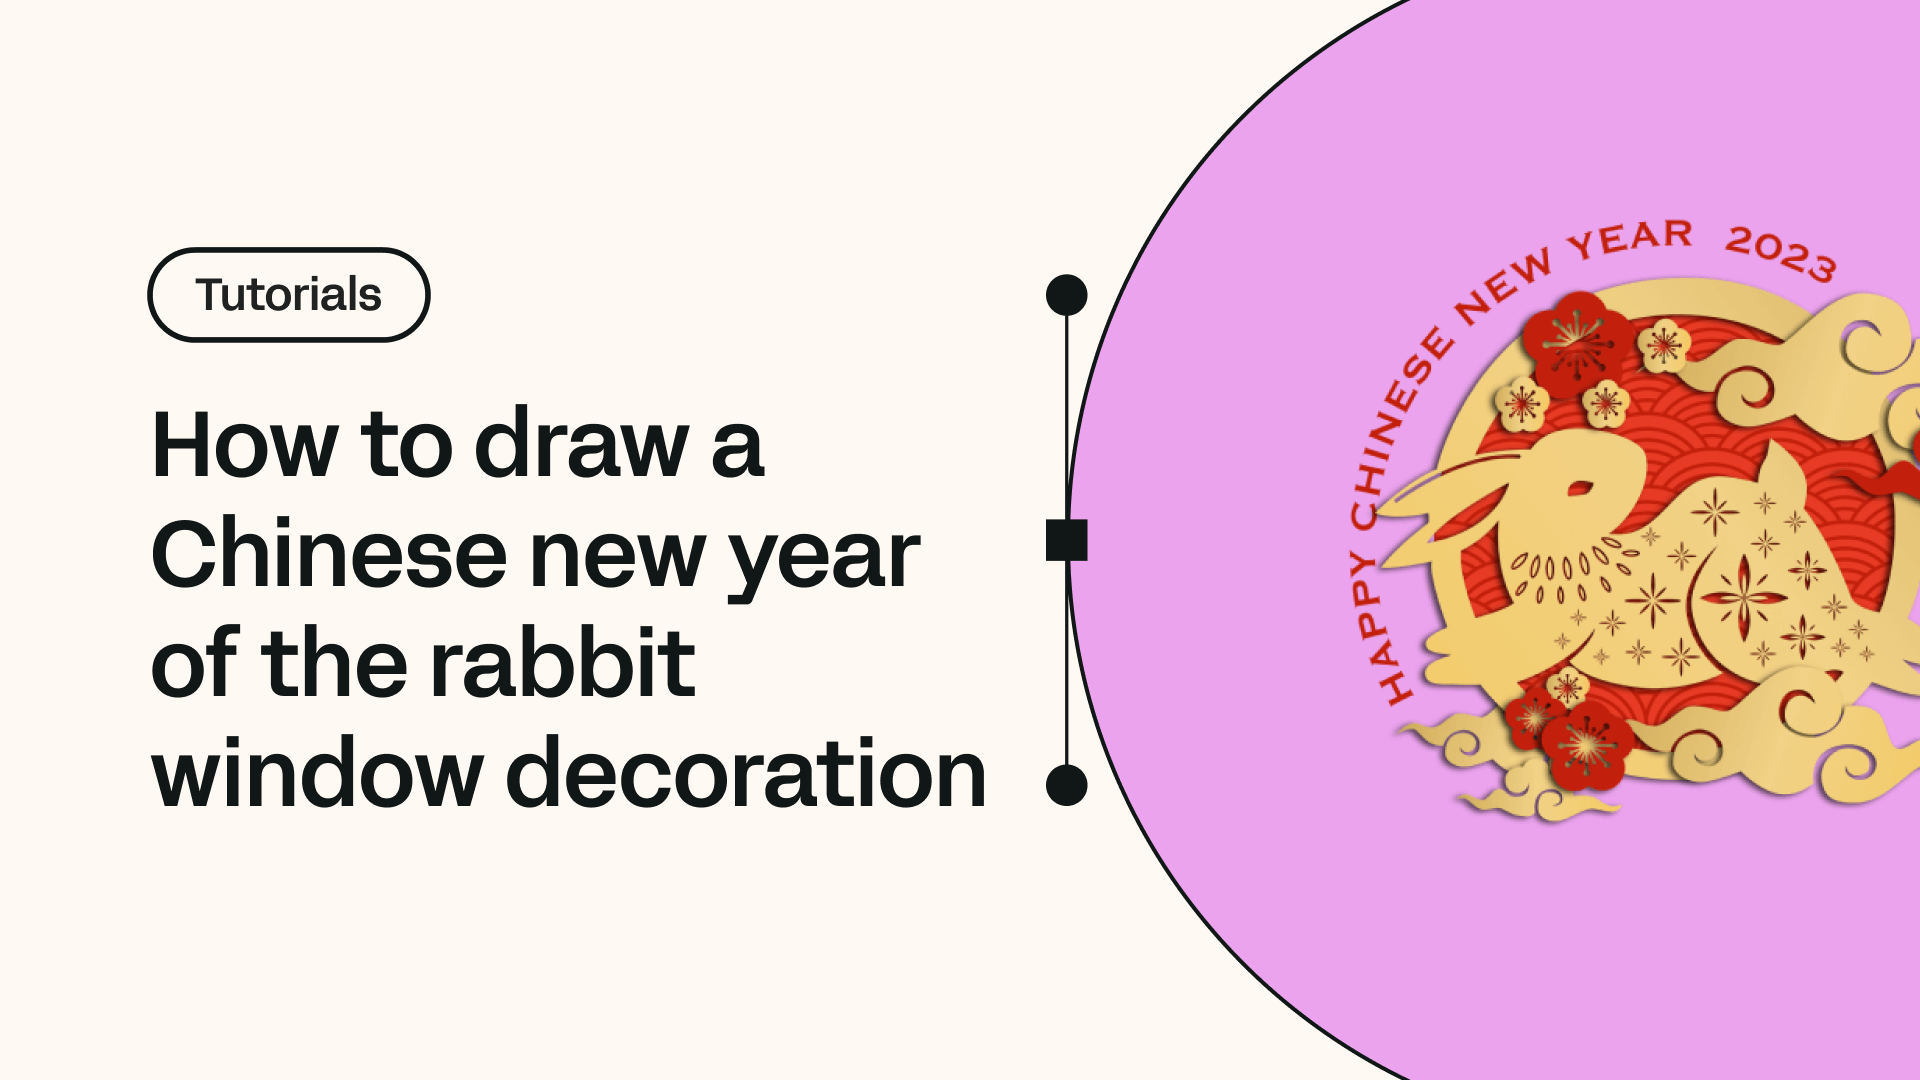 How to draw a Chinese new year of the rabbit window decoration | Linearity